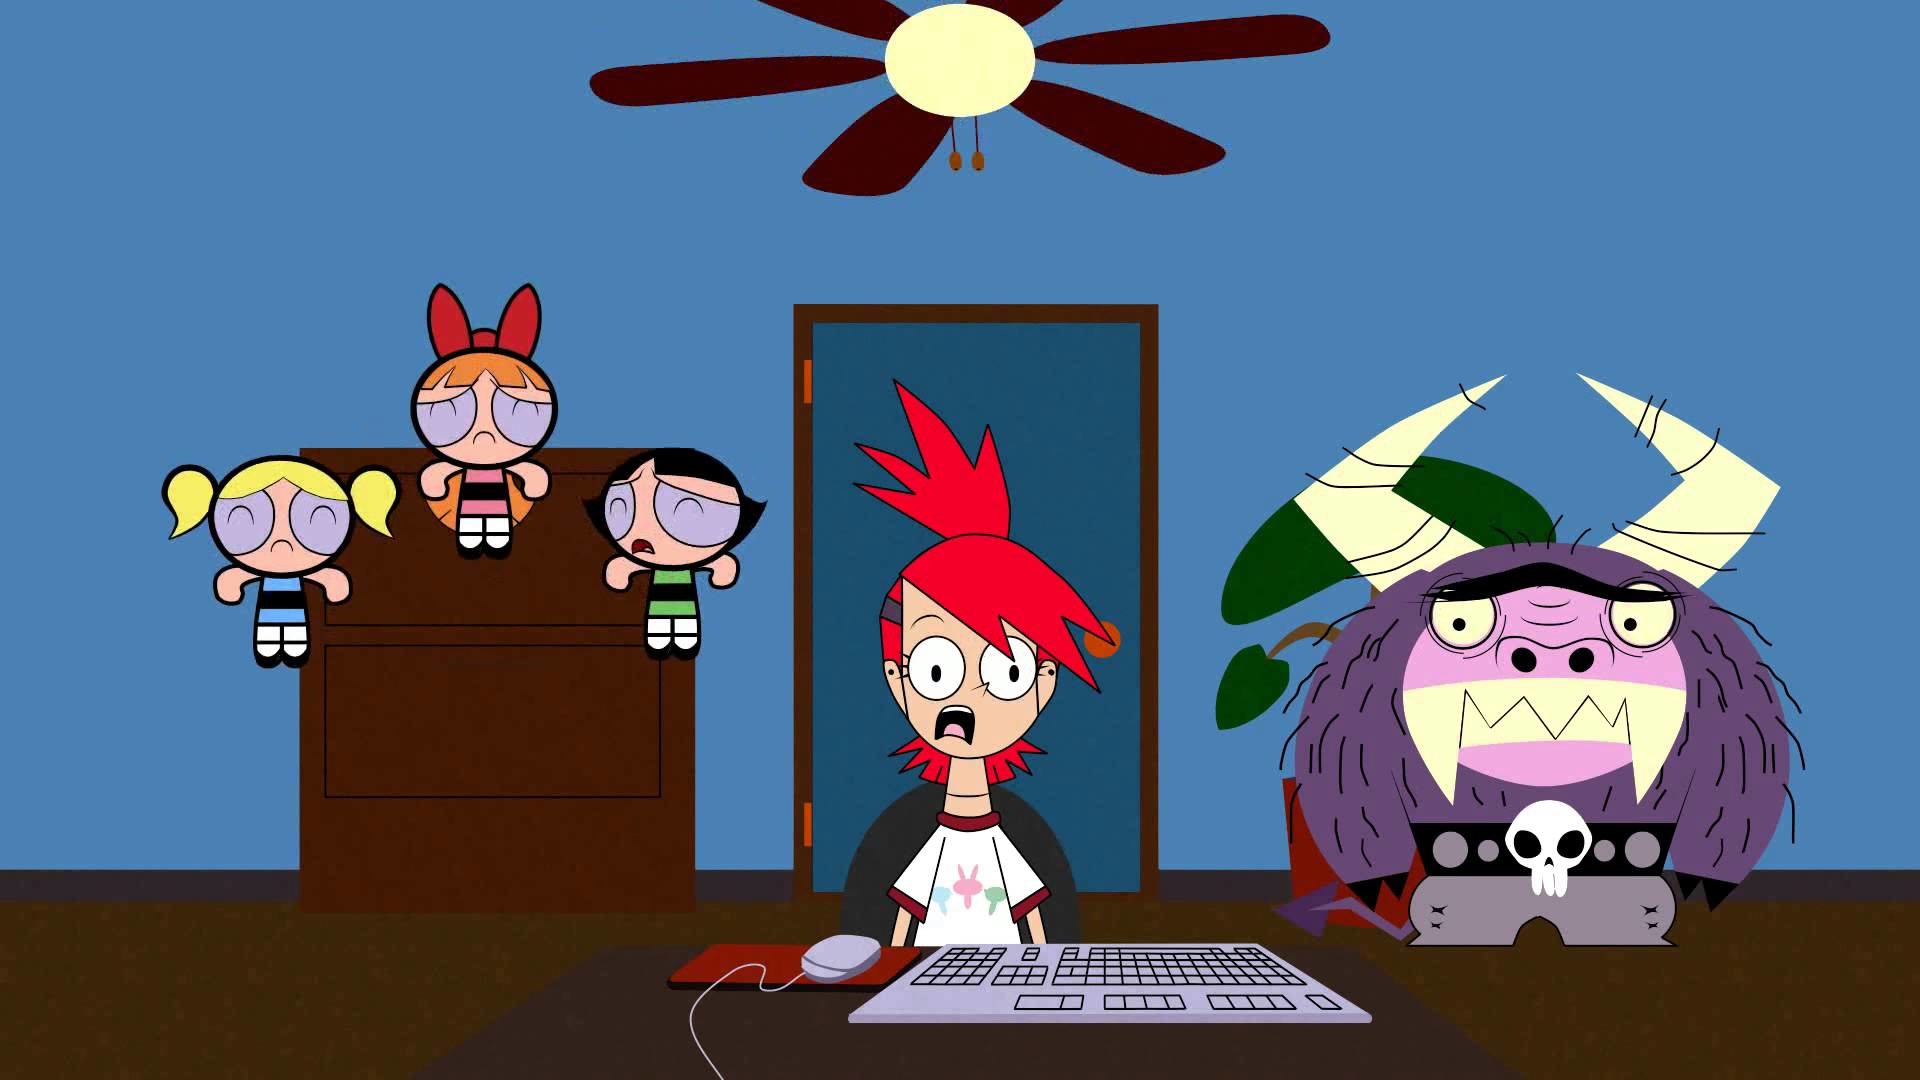 Homes rule 34. Дом друзей Фостера Rule 34. Fosters Home for Imaginary friends Фрэнки. Фрэнки Фостер 34.